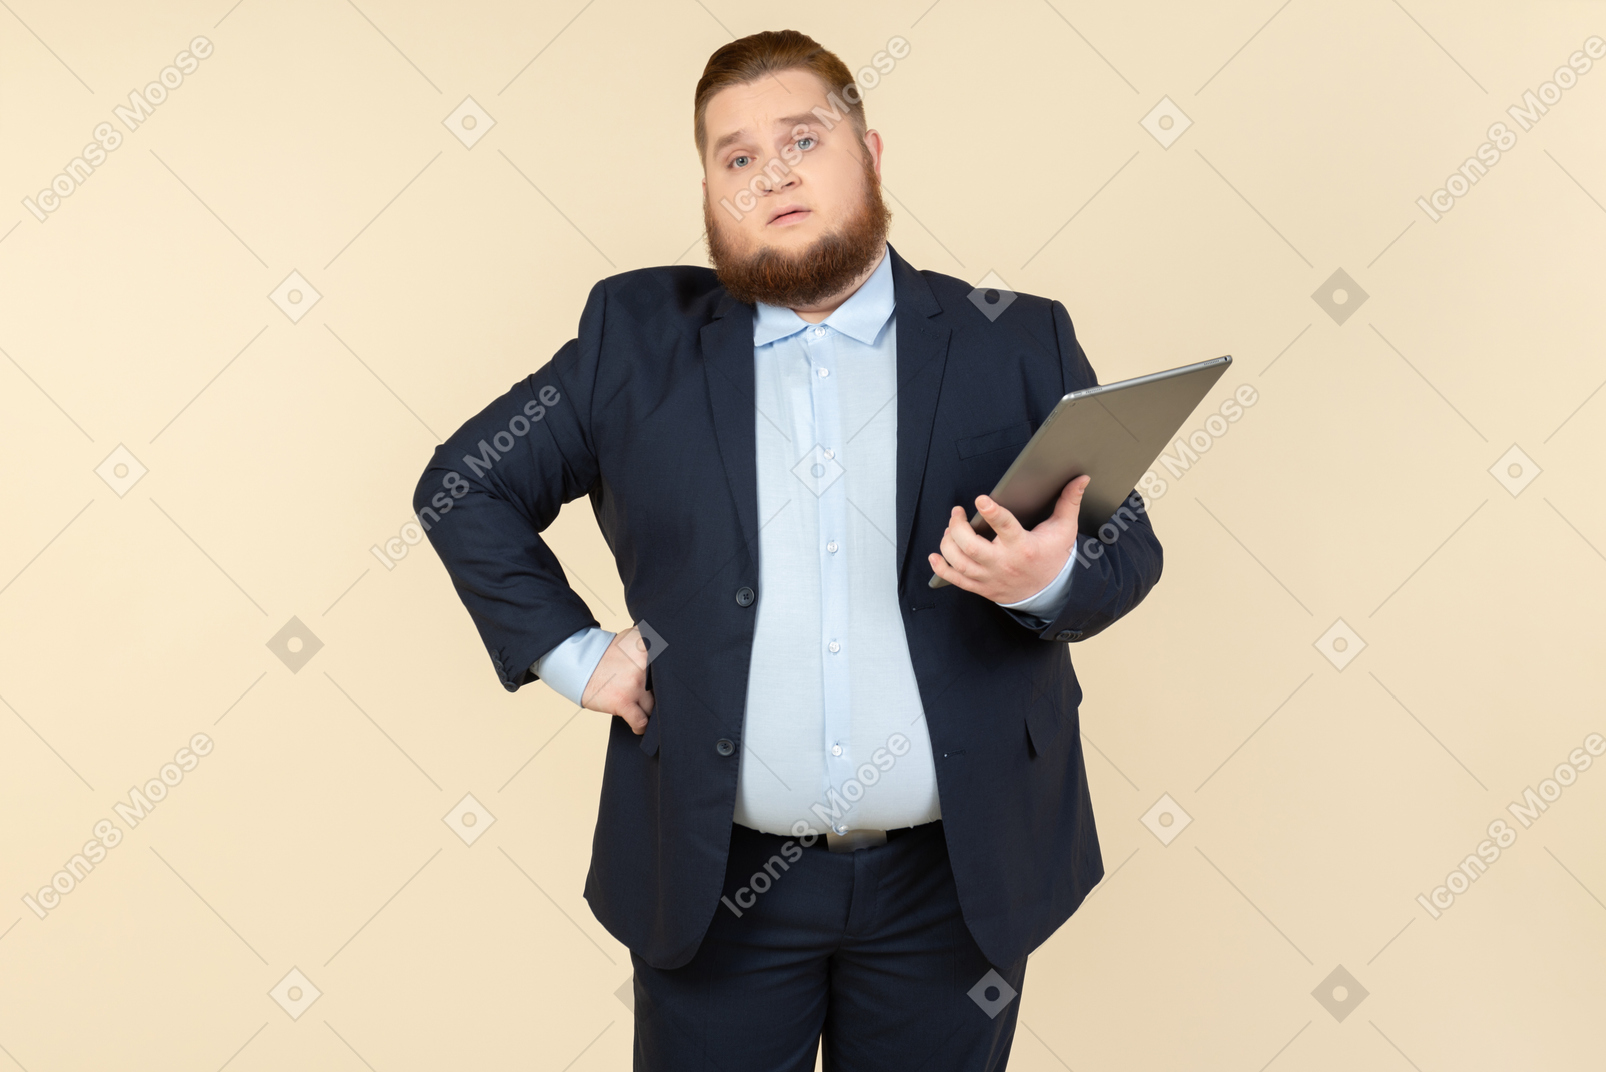 Serious looking young overweight office worker holding digital tablet